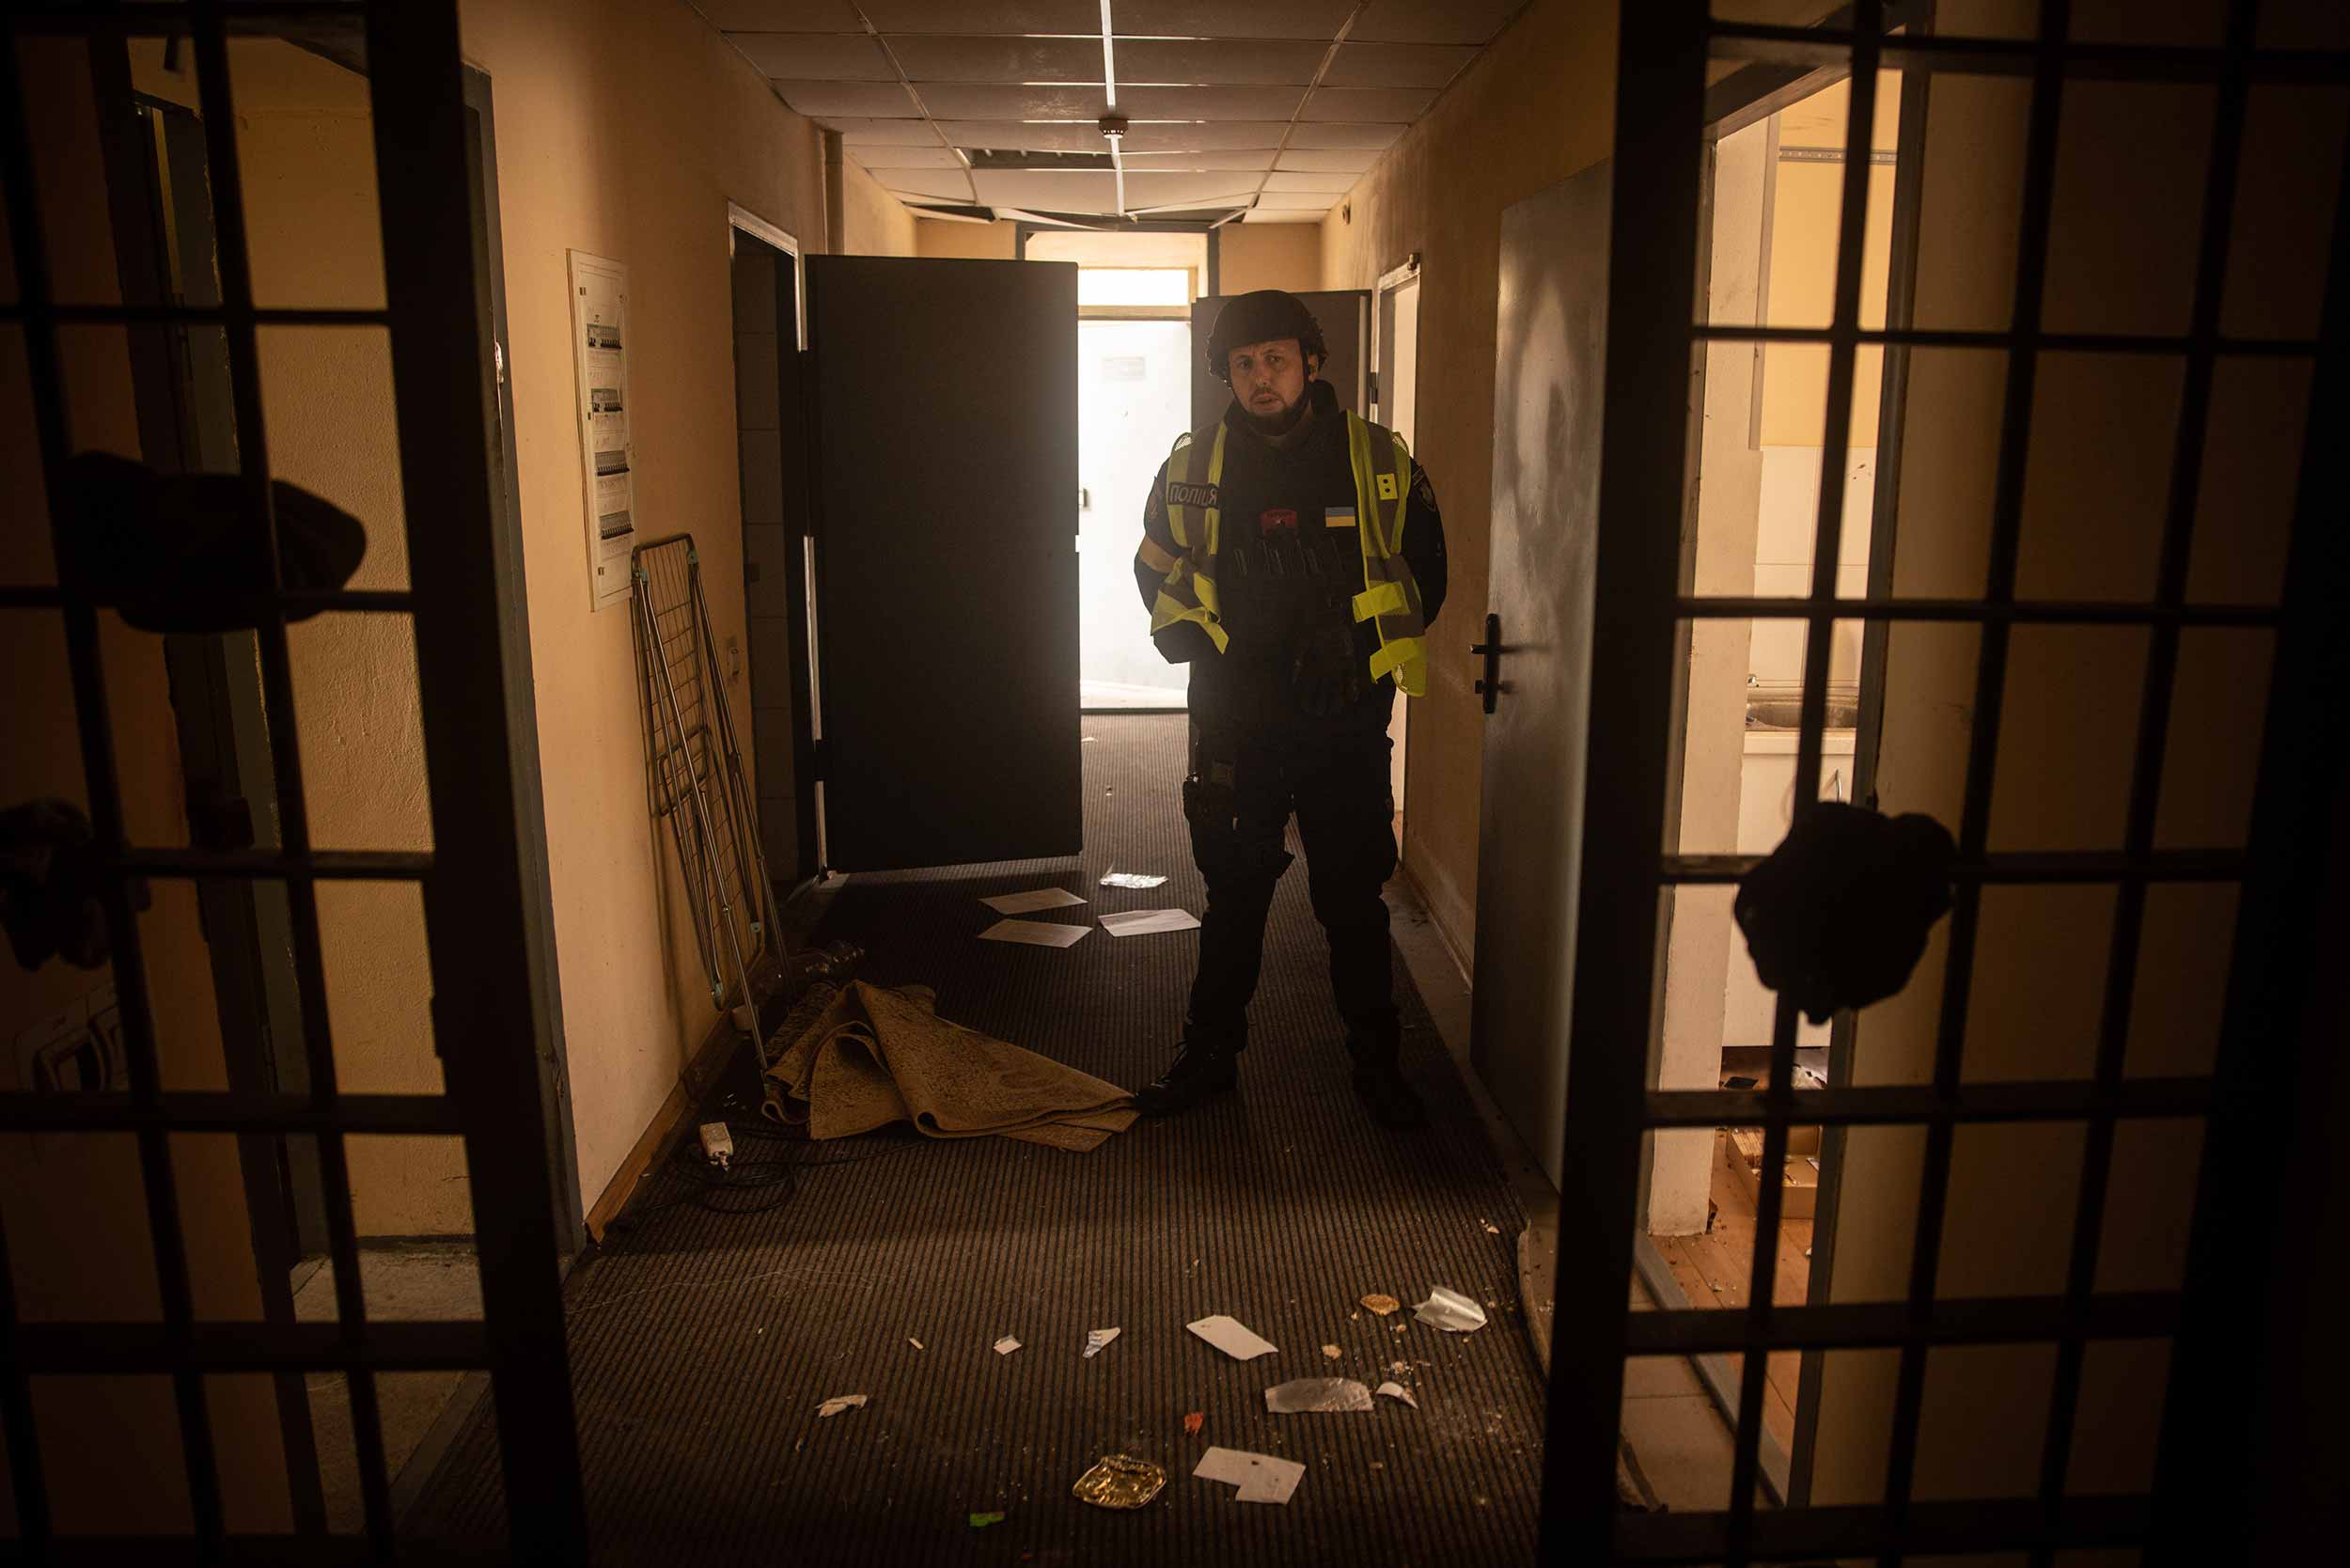 A Ukrainian police officer stands guard in the hallway of a preliminary detention centre which is believed to have been used by Russian forces to jail and torture civilians on November 16, 2022 in Kherson, Ukraine. © Chris McGrath/Getty Images